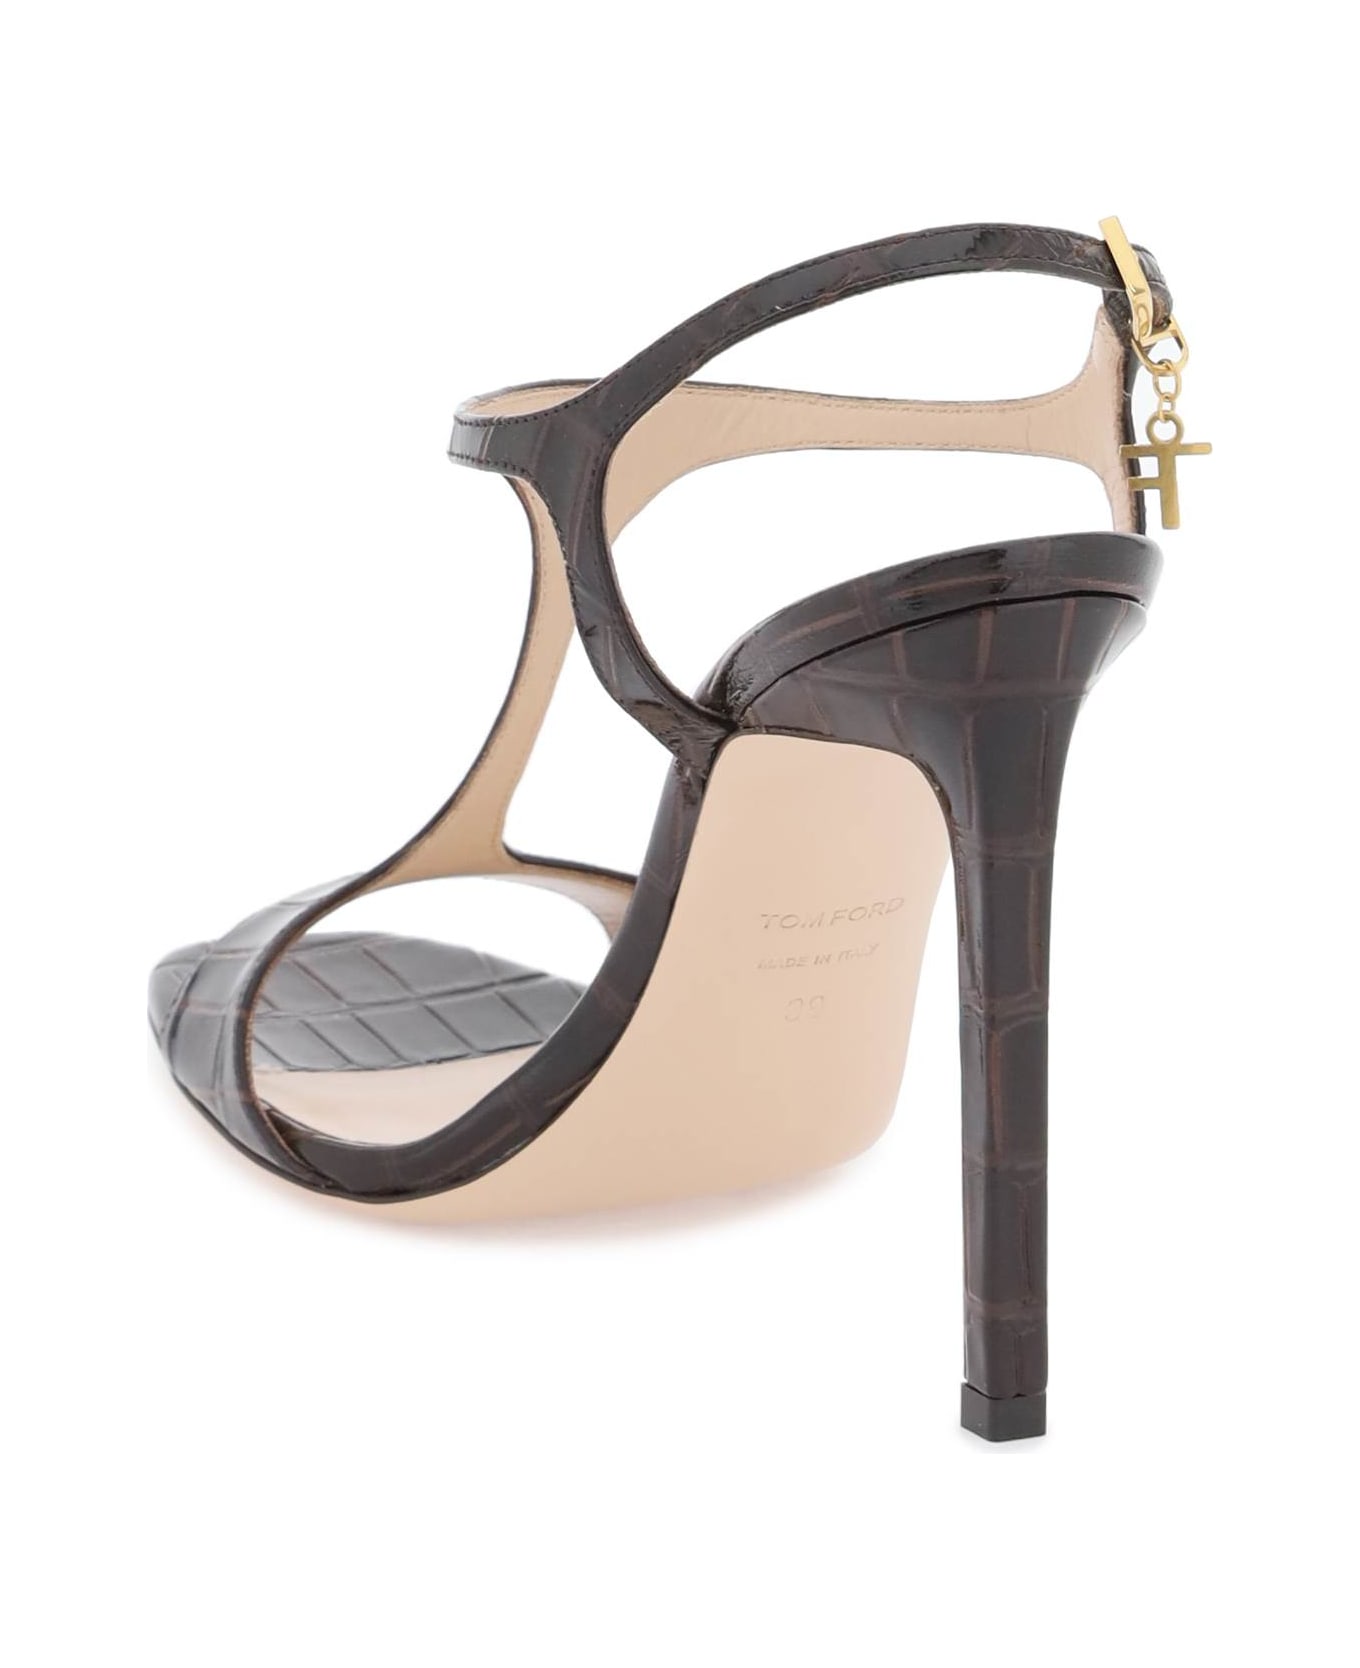 Tom Ford Angelina Sandals In Croco-embossed Glossy Leather - ESPRESSO サンダル